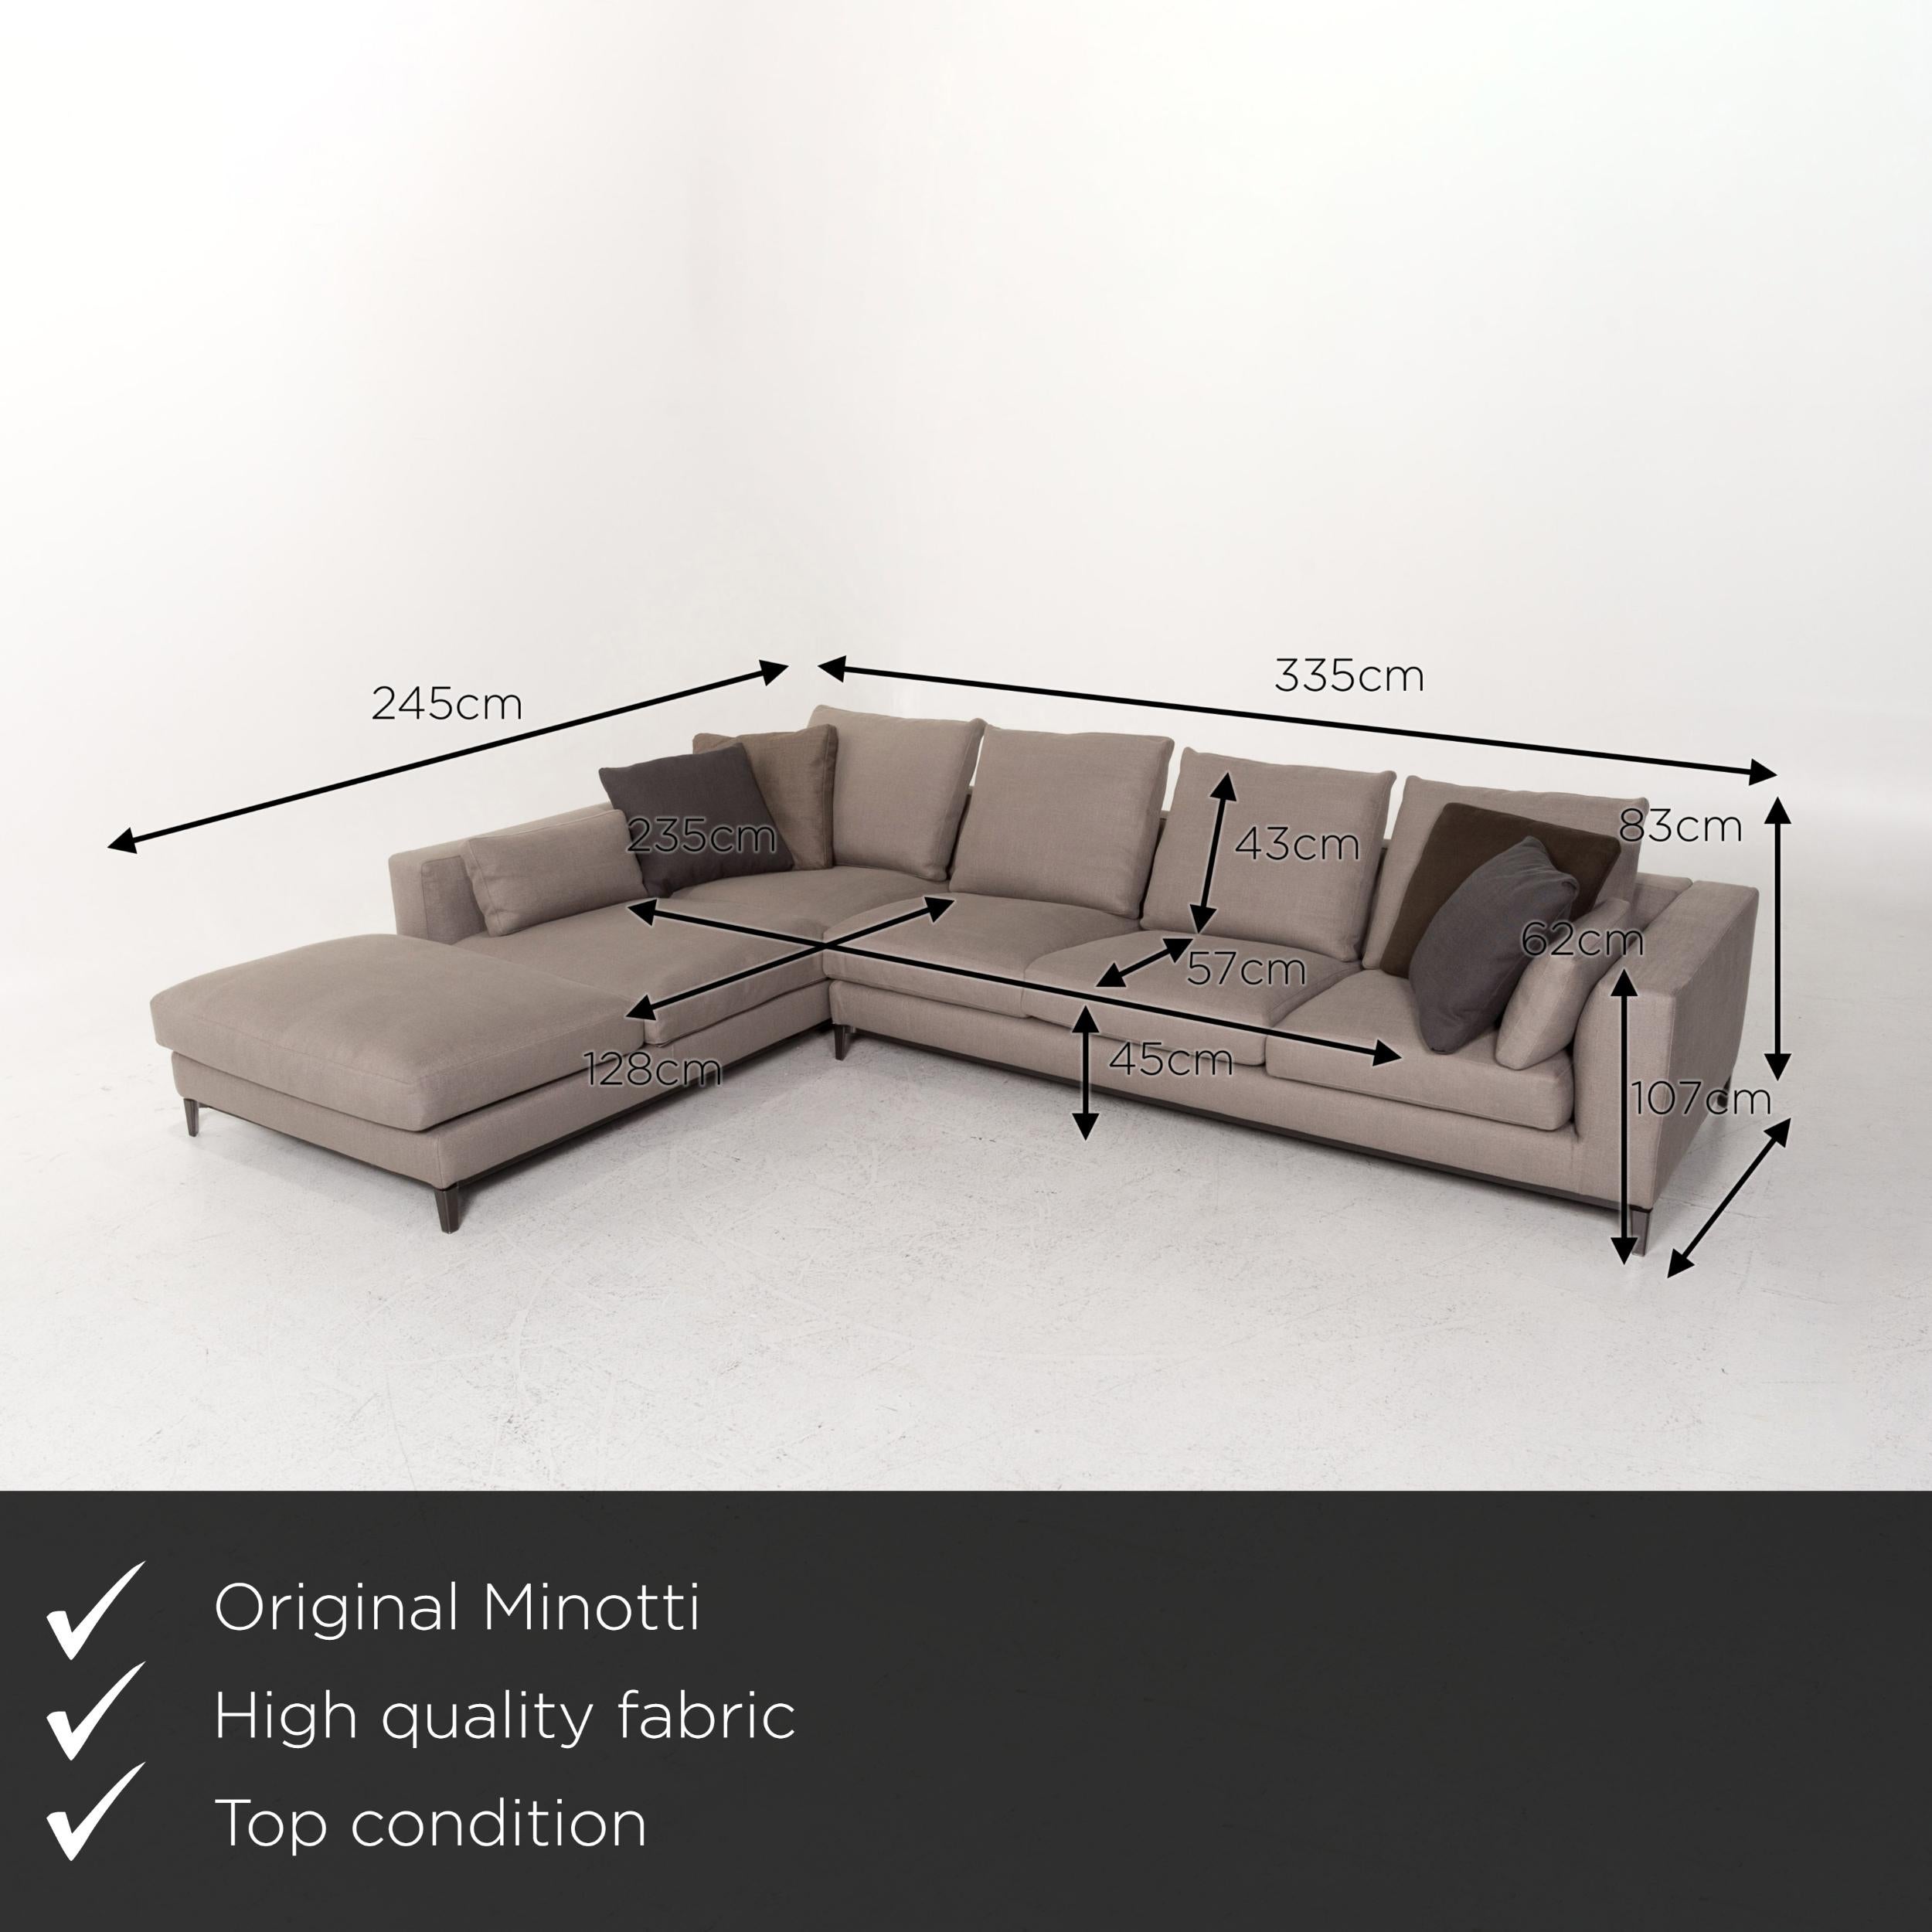 We present to you a Minotti Andersen fabric corner sofa gray Skandi sofa couch.


 Product measurements in centimeters:
 

Depth 107
Width 245
Height 83
Seat height 45
Rest height 62
Seat depth 57
Seat width 128
Back height 43.

  